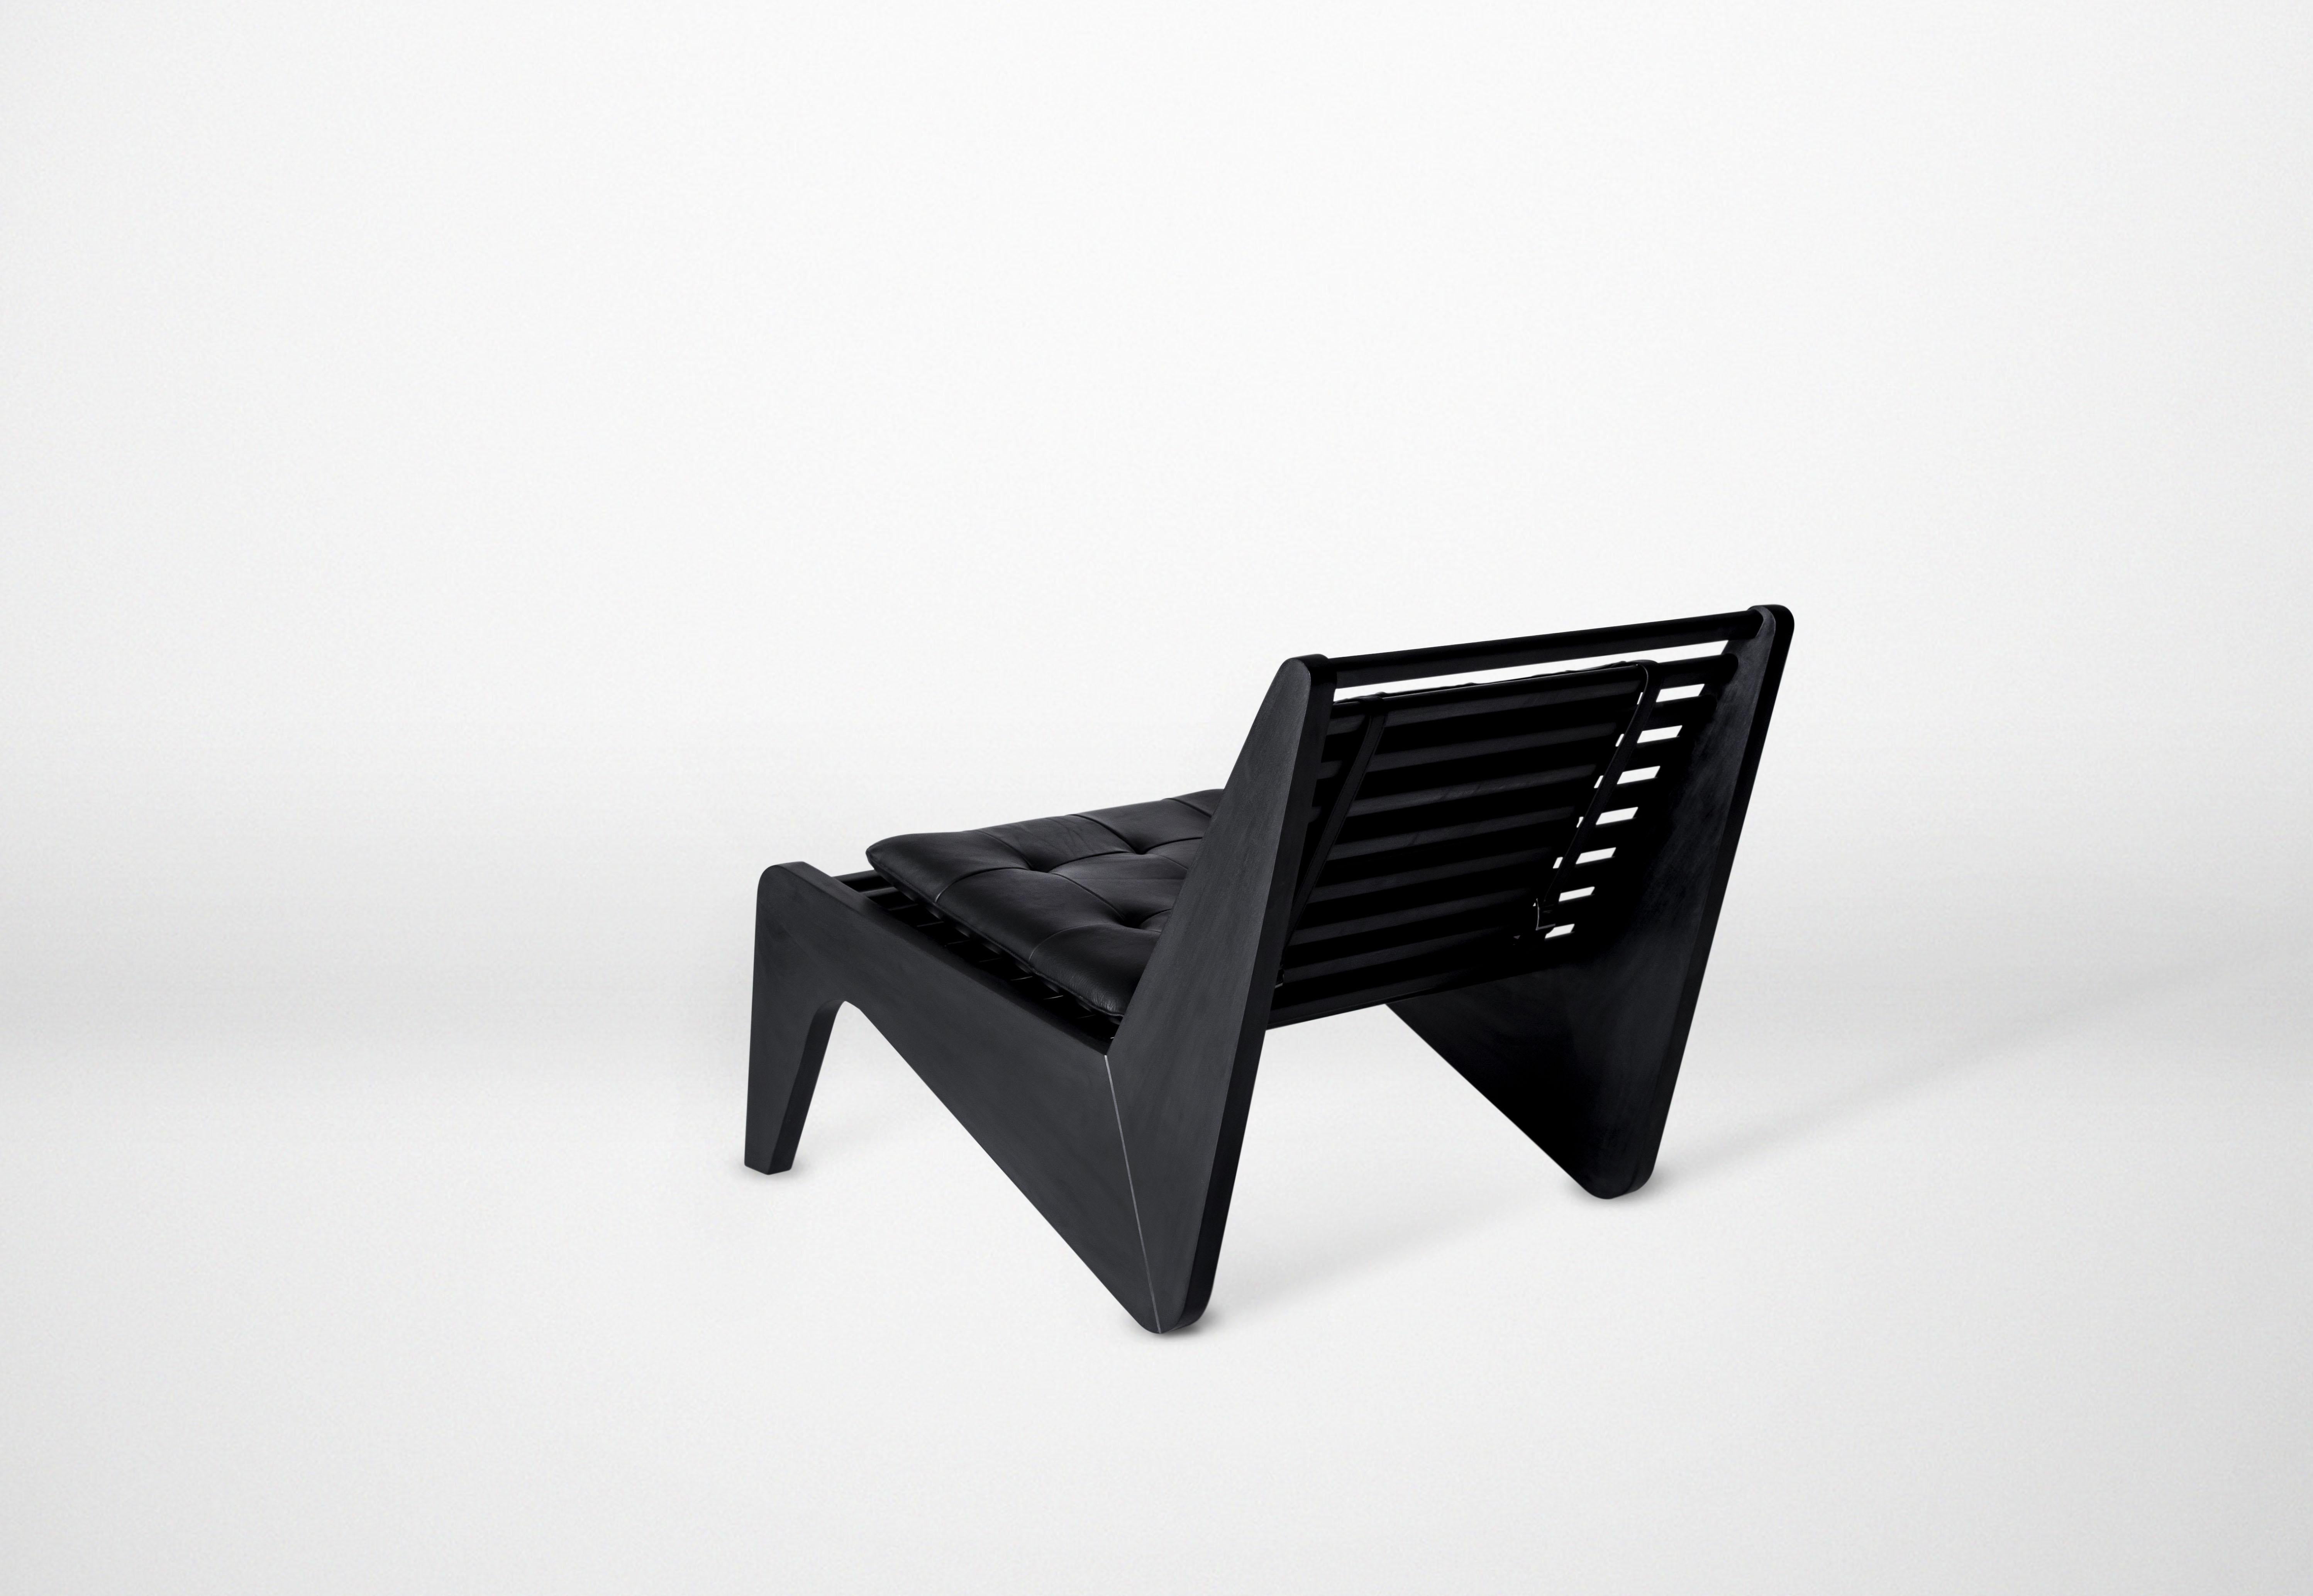 Other Black Ala Lounge Chair by Atra Design